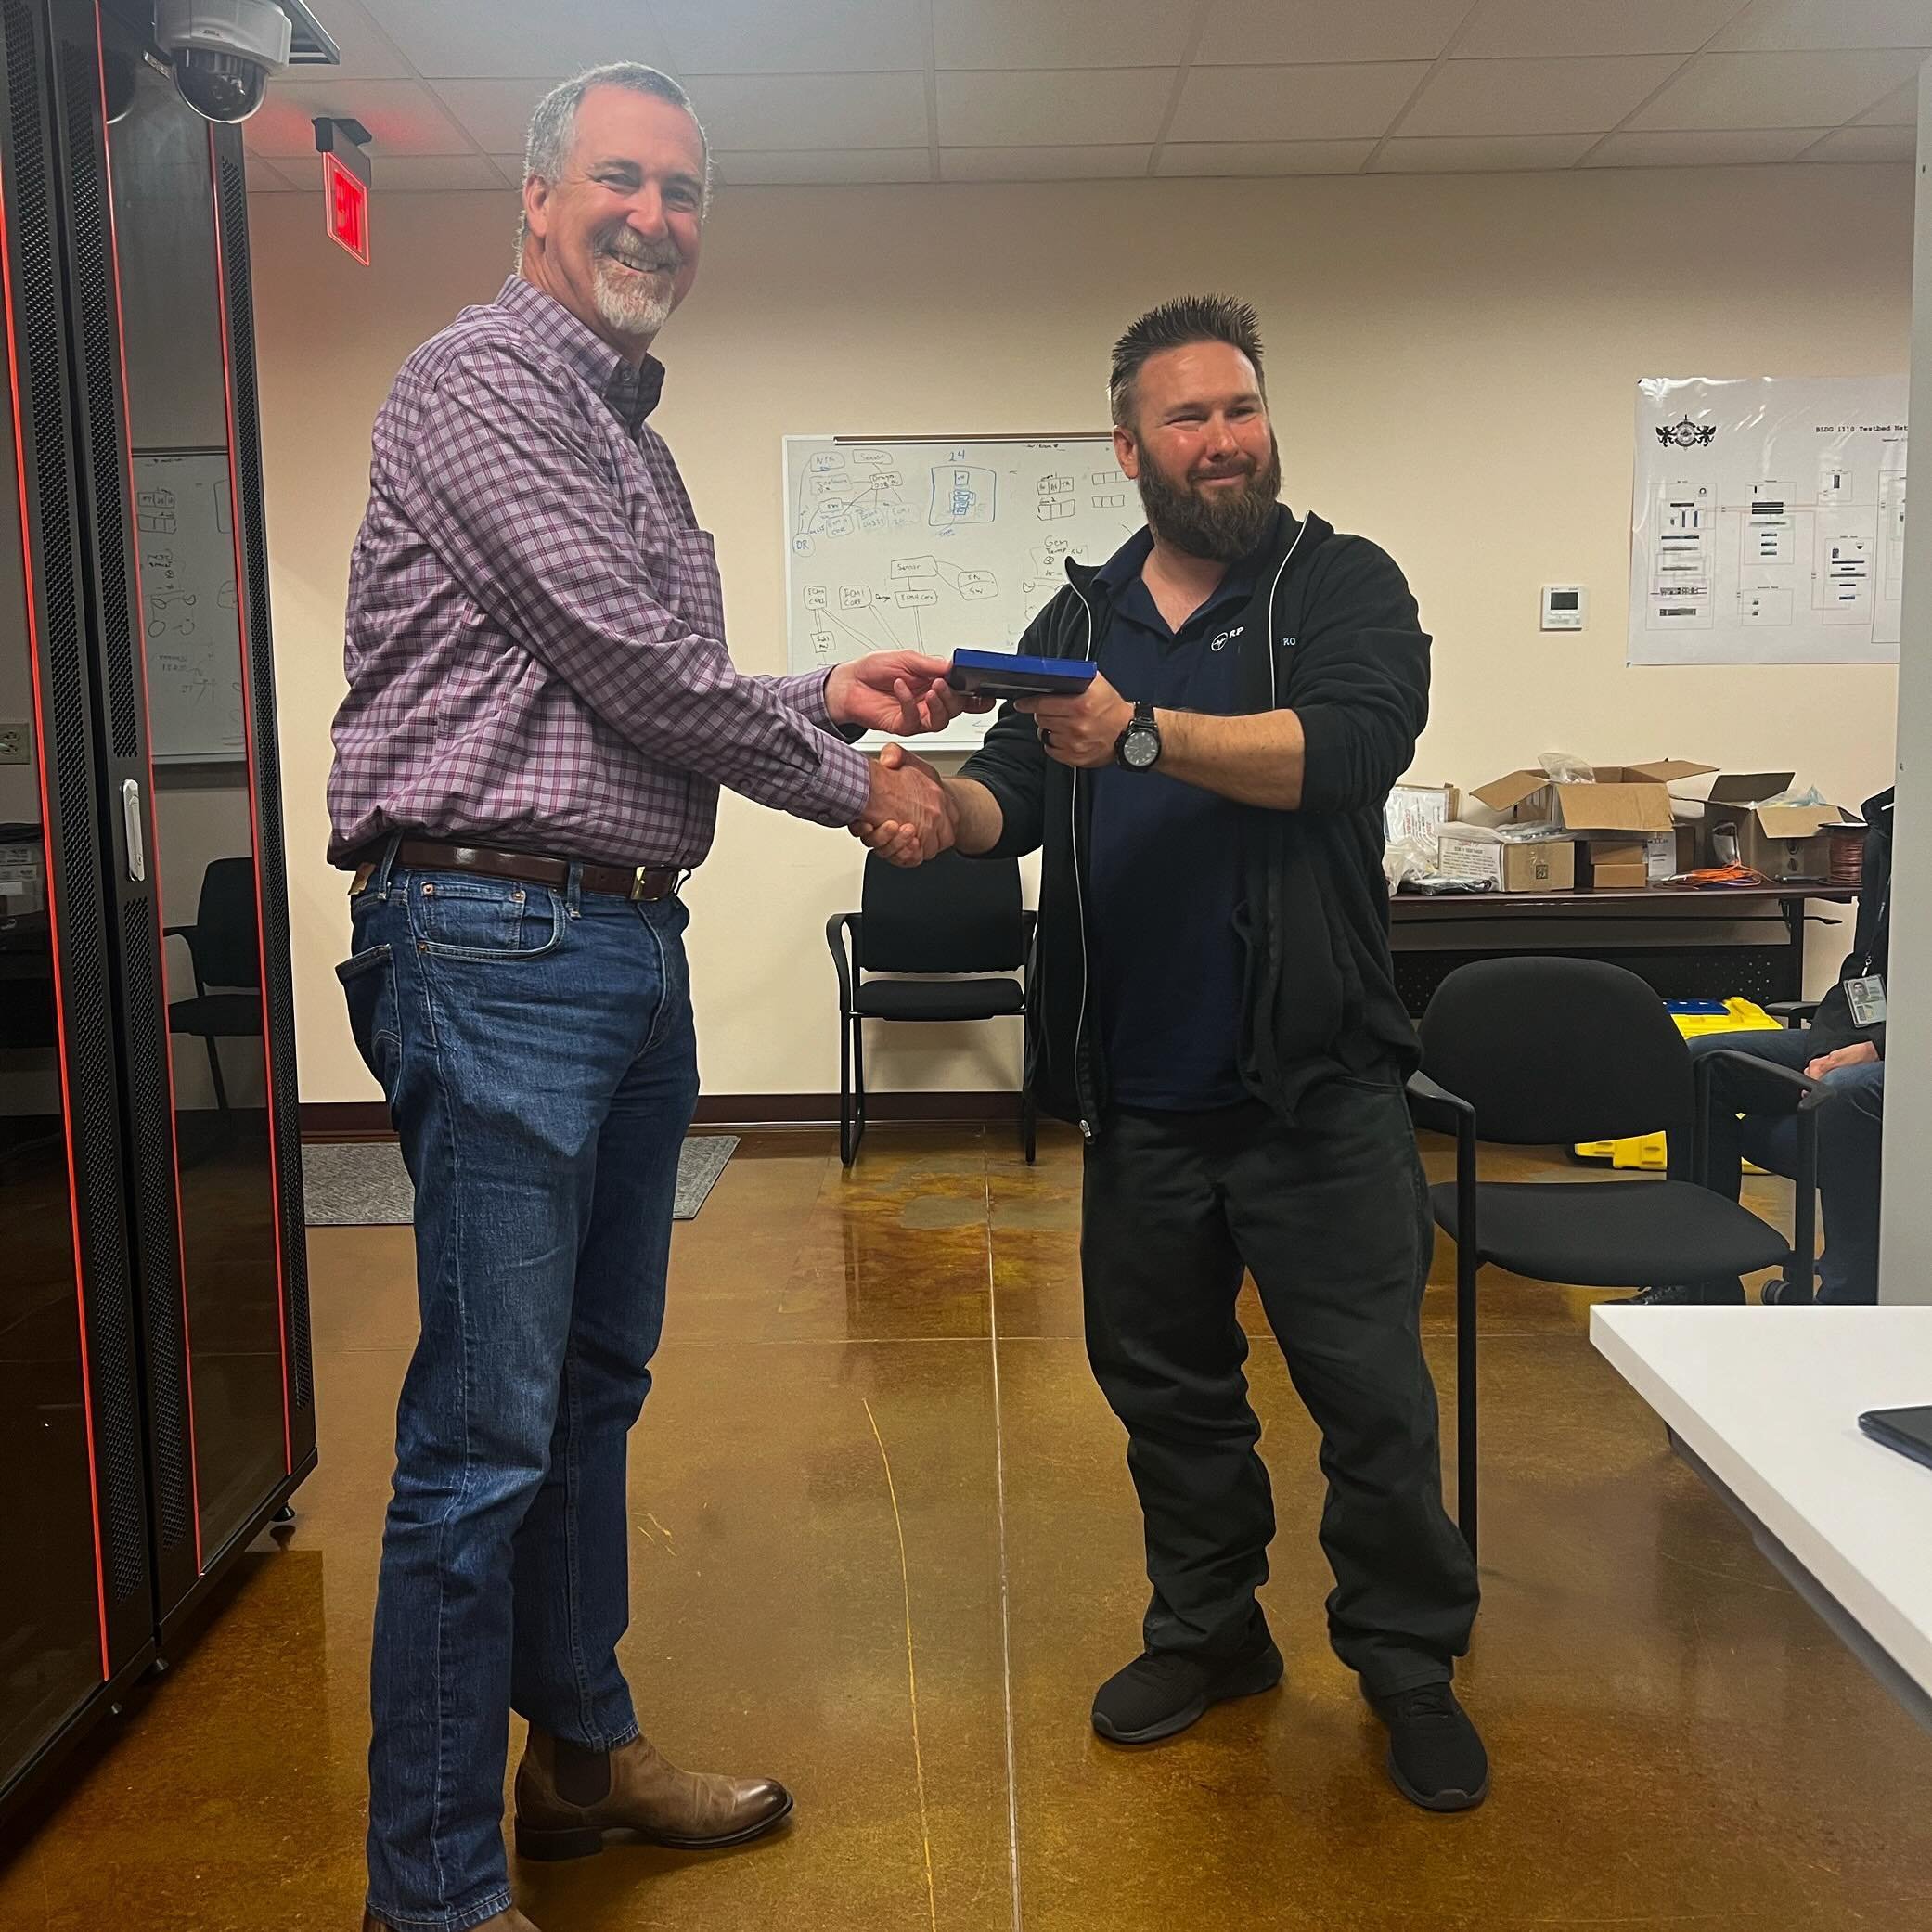 We&rsquo;d like to highlight John, one of our Cybersecurity Analysts from CLNC, who improved ICS/OT security and asset management by developing a creative solution that significantly enhances data insight. Congratulations to John! Thank you for your 